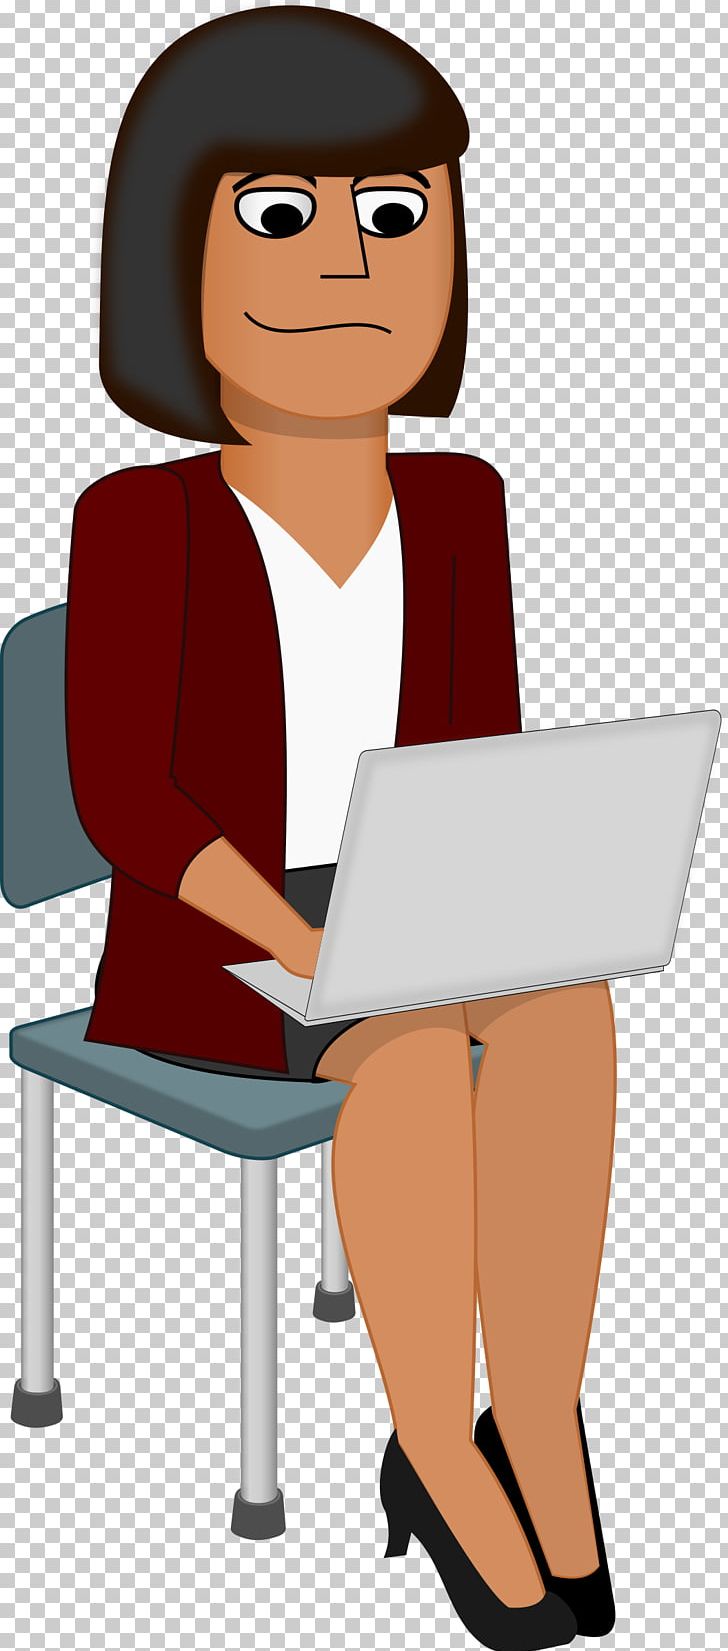 Laptop Woman PNG, Clipart, Business, Cartoon, Chair, Communication, Computer Free PNG Download